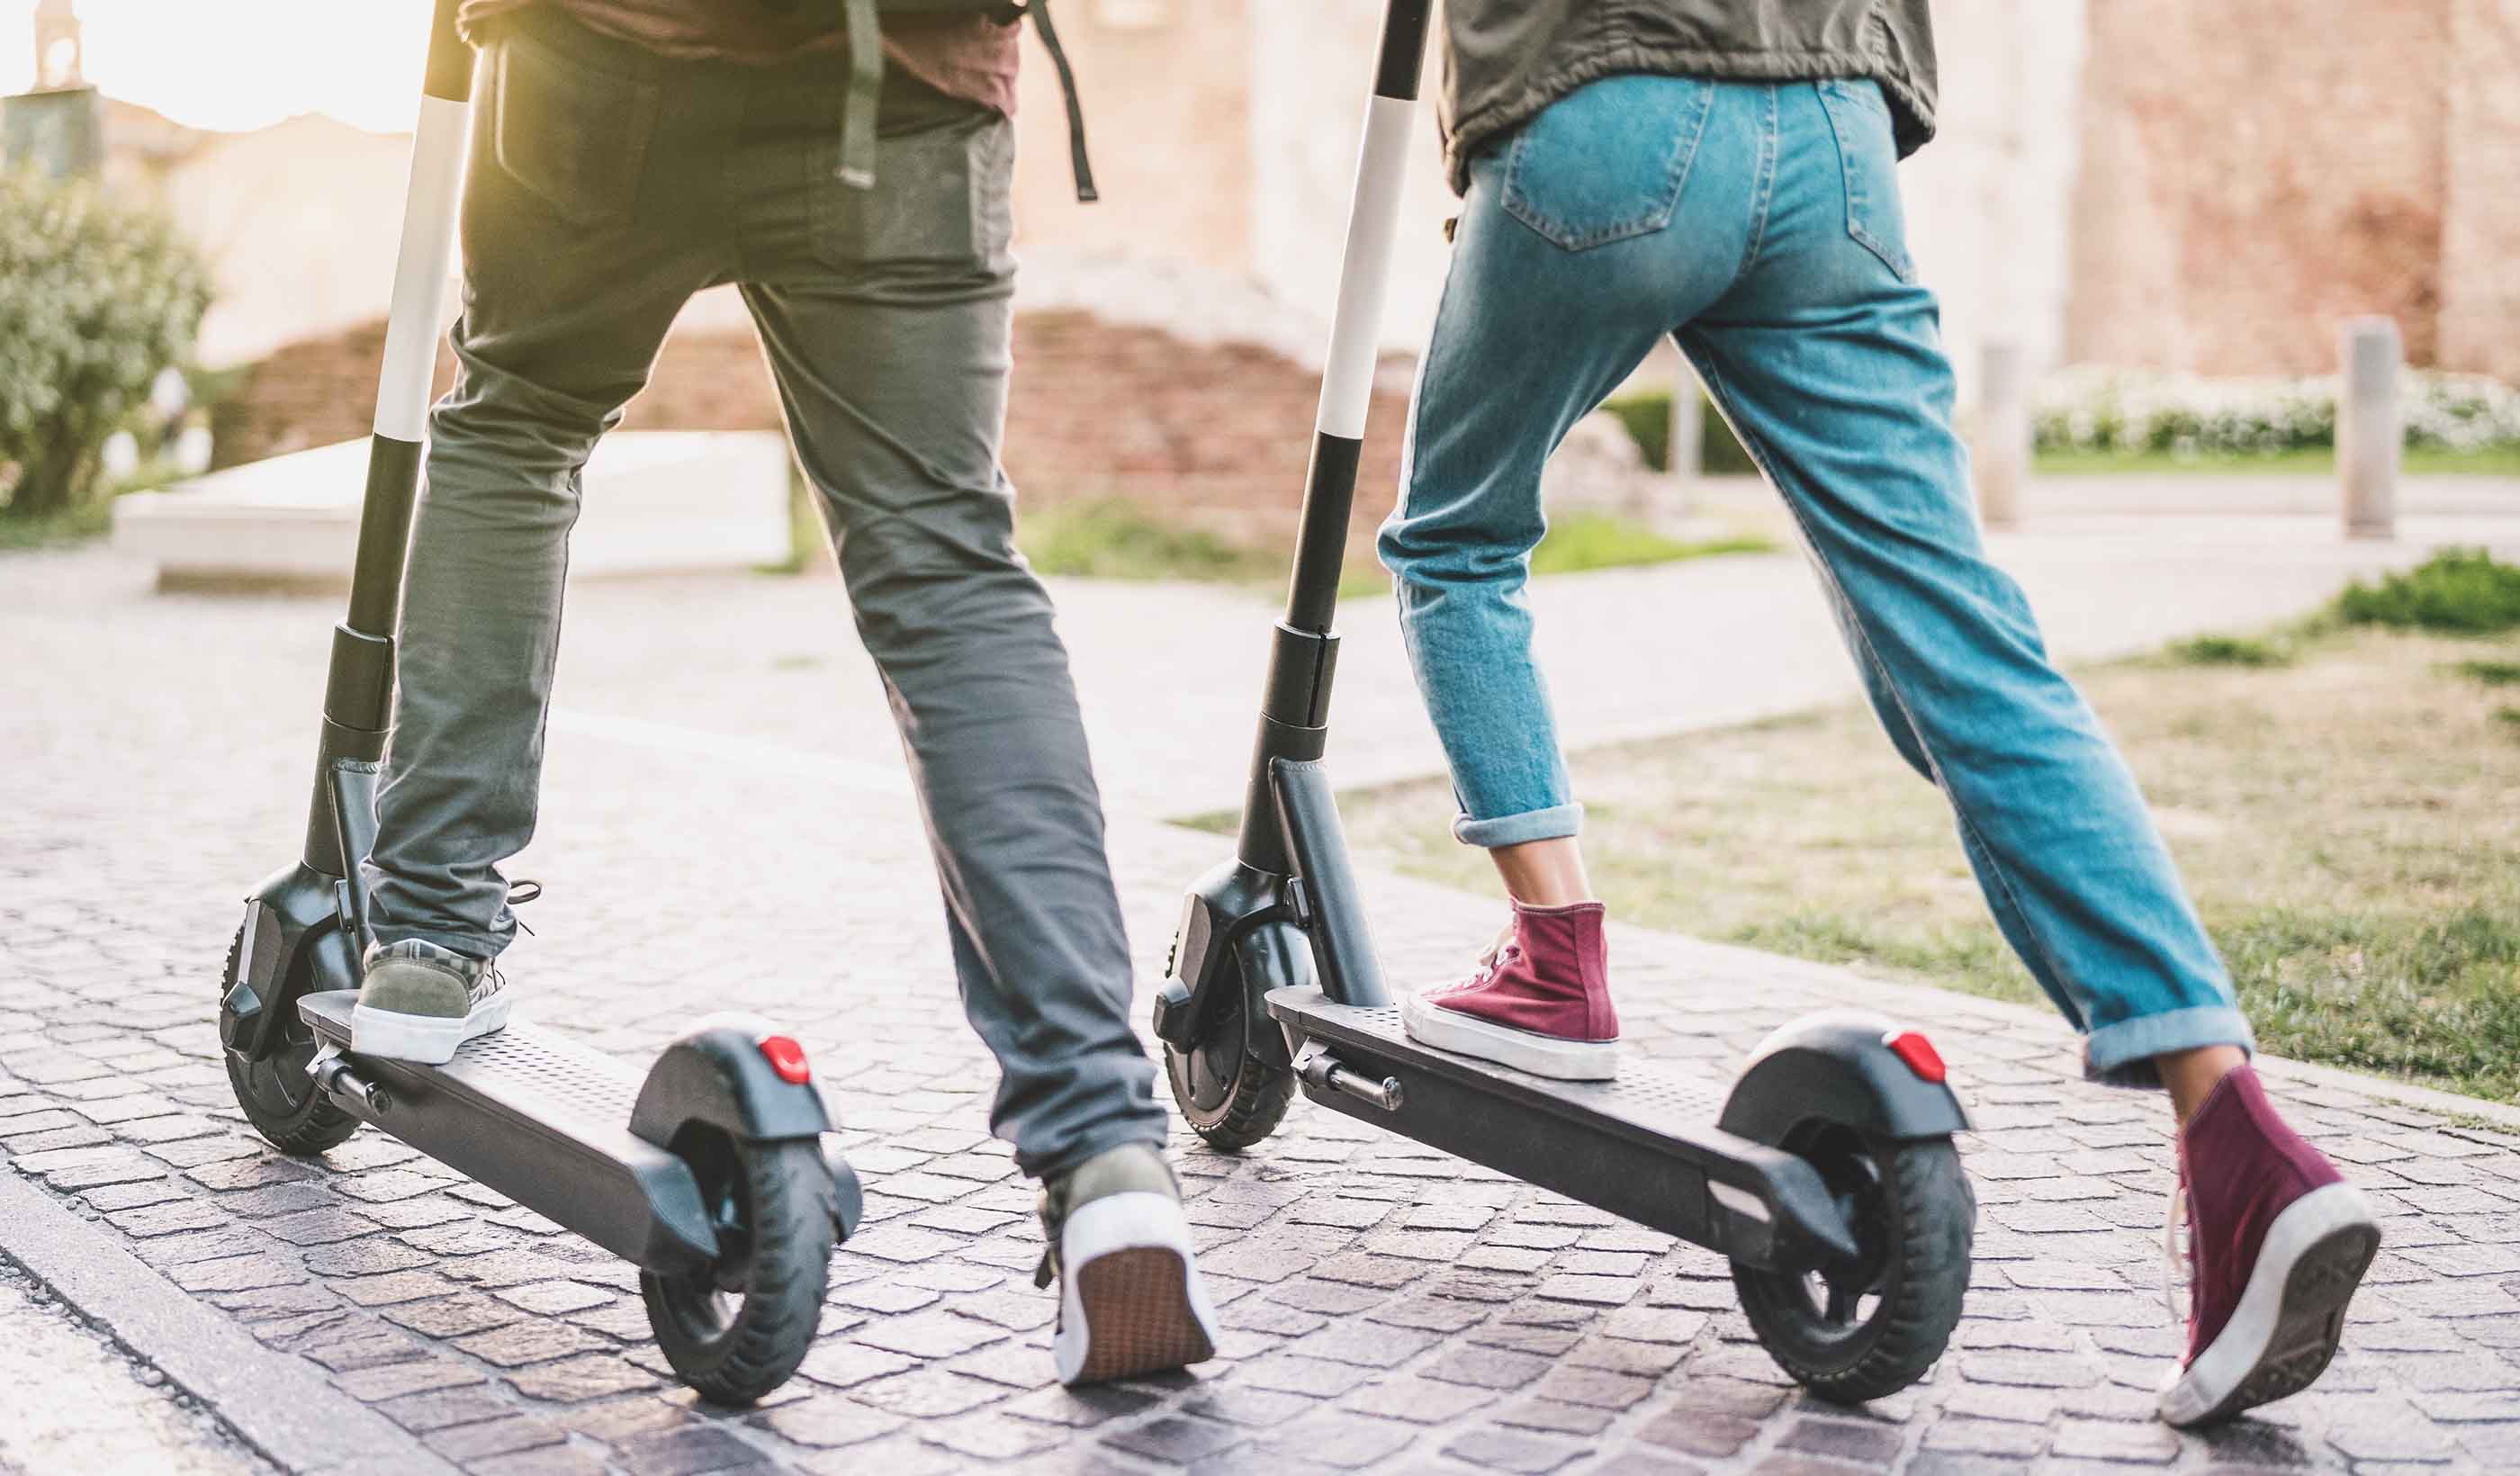 Is this the beginning of a micromobility revolution?